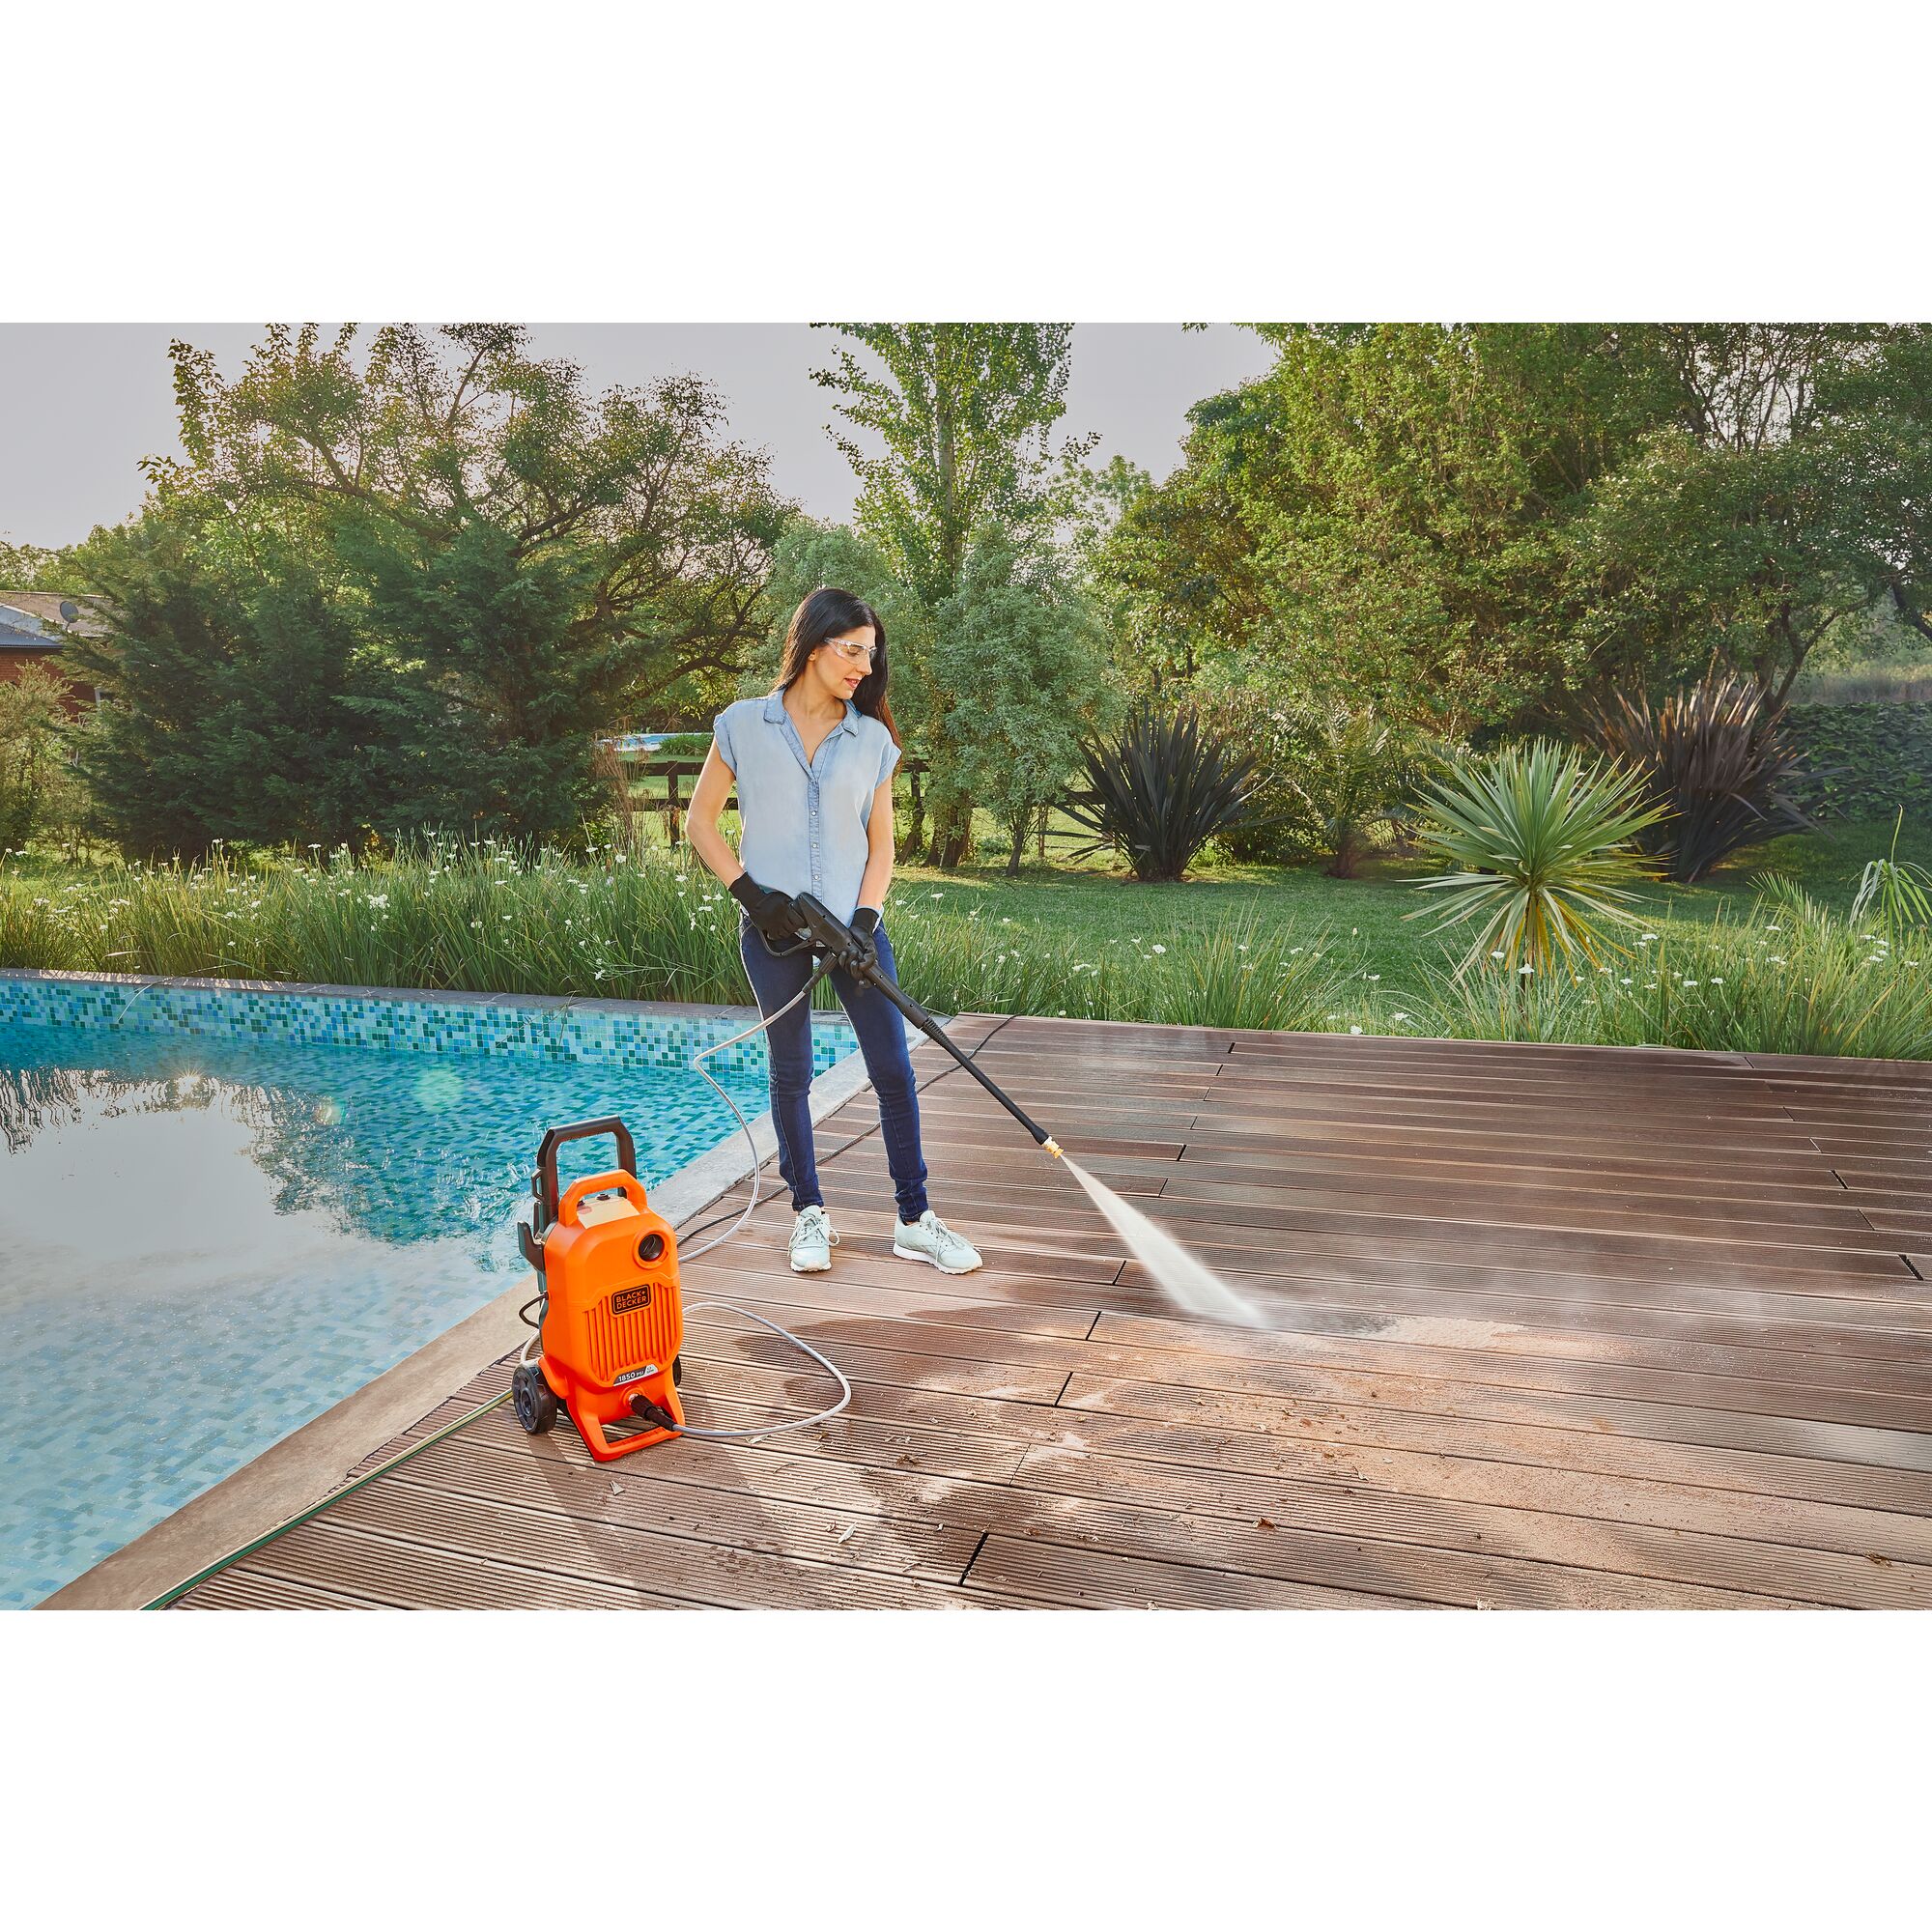 Woman cleaning a swimming pool deck with the BLACK+DECKER 1,850 MAX psi* pressure washer with 15˚ nozzle